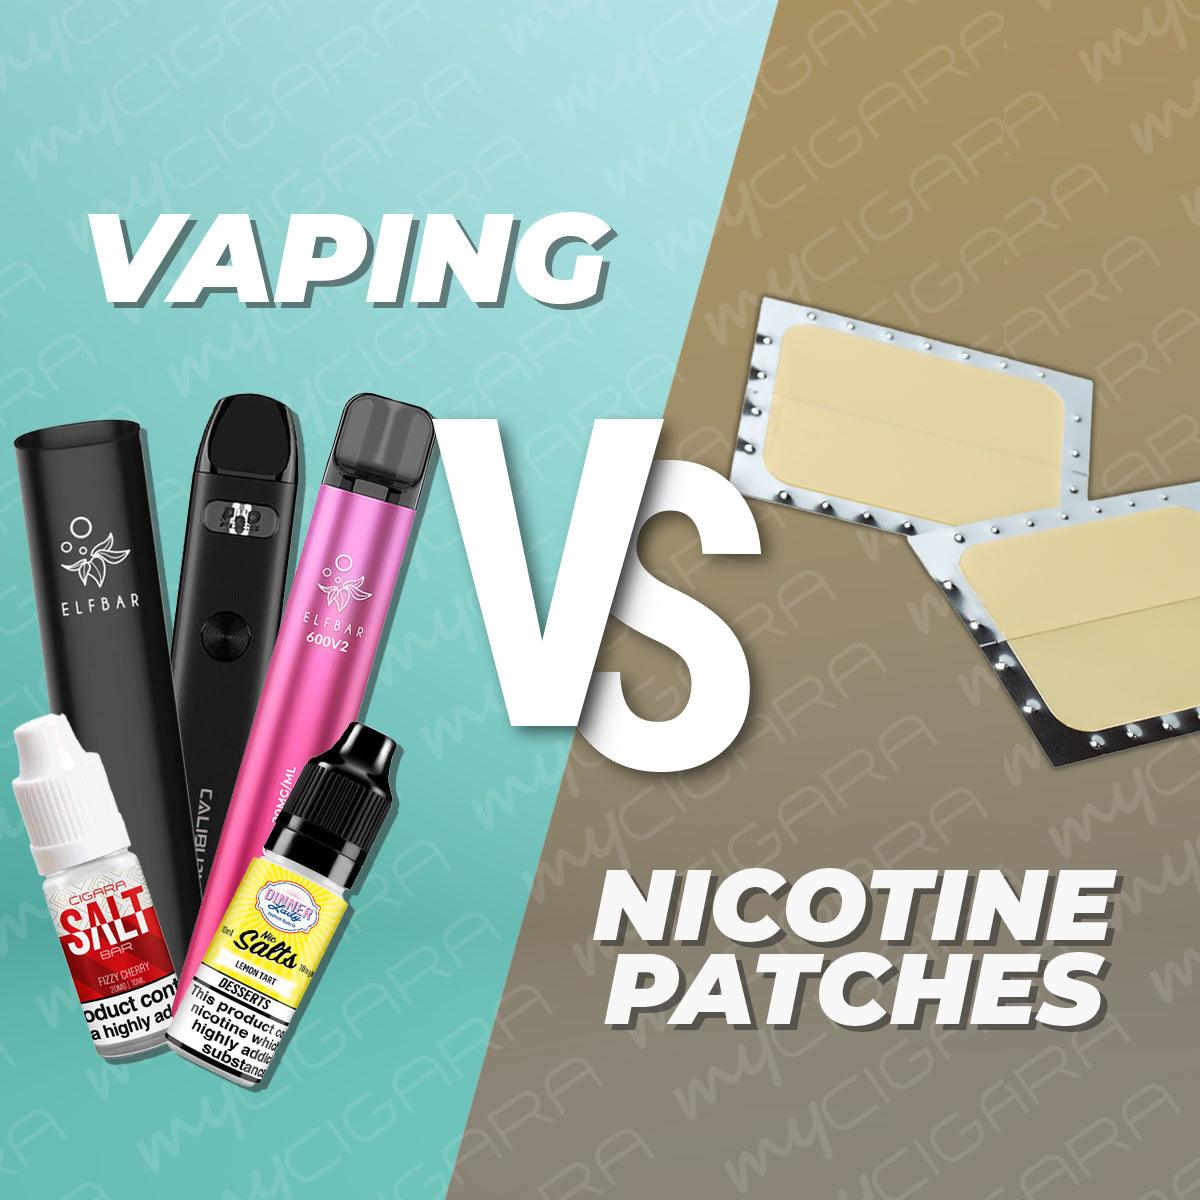 Vaping Vs Nicotine Patches: What’s The Difference?